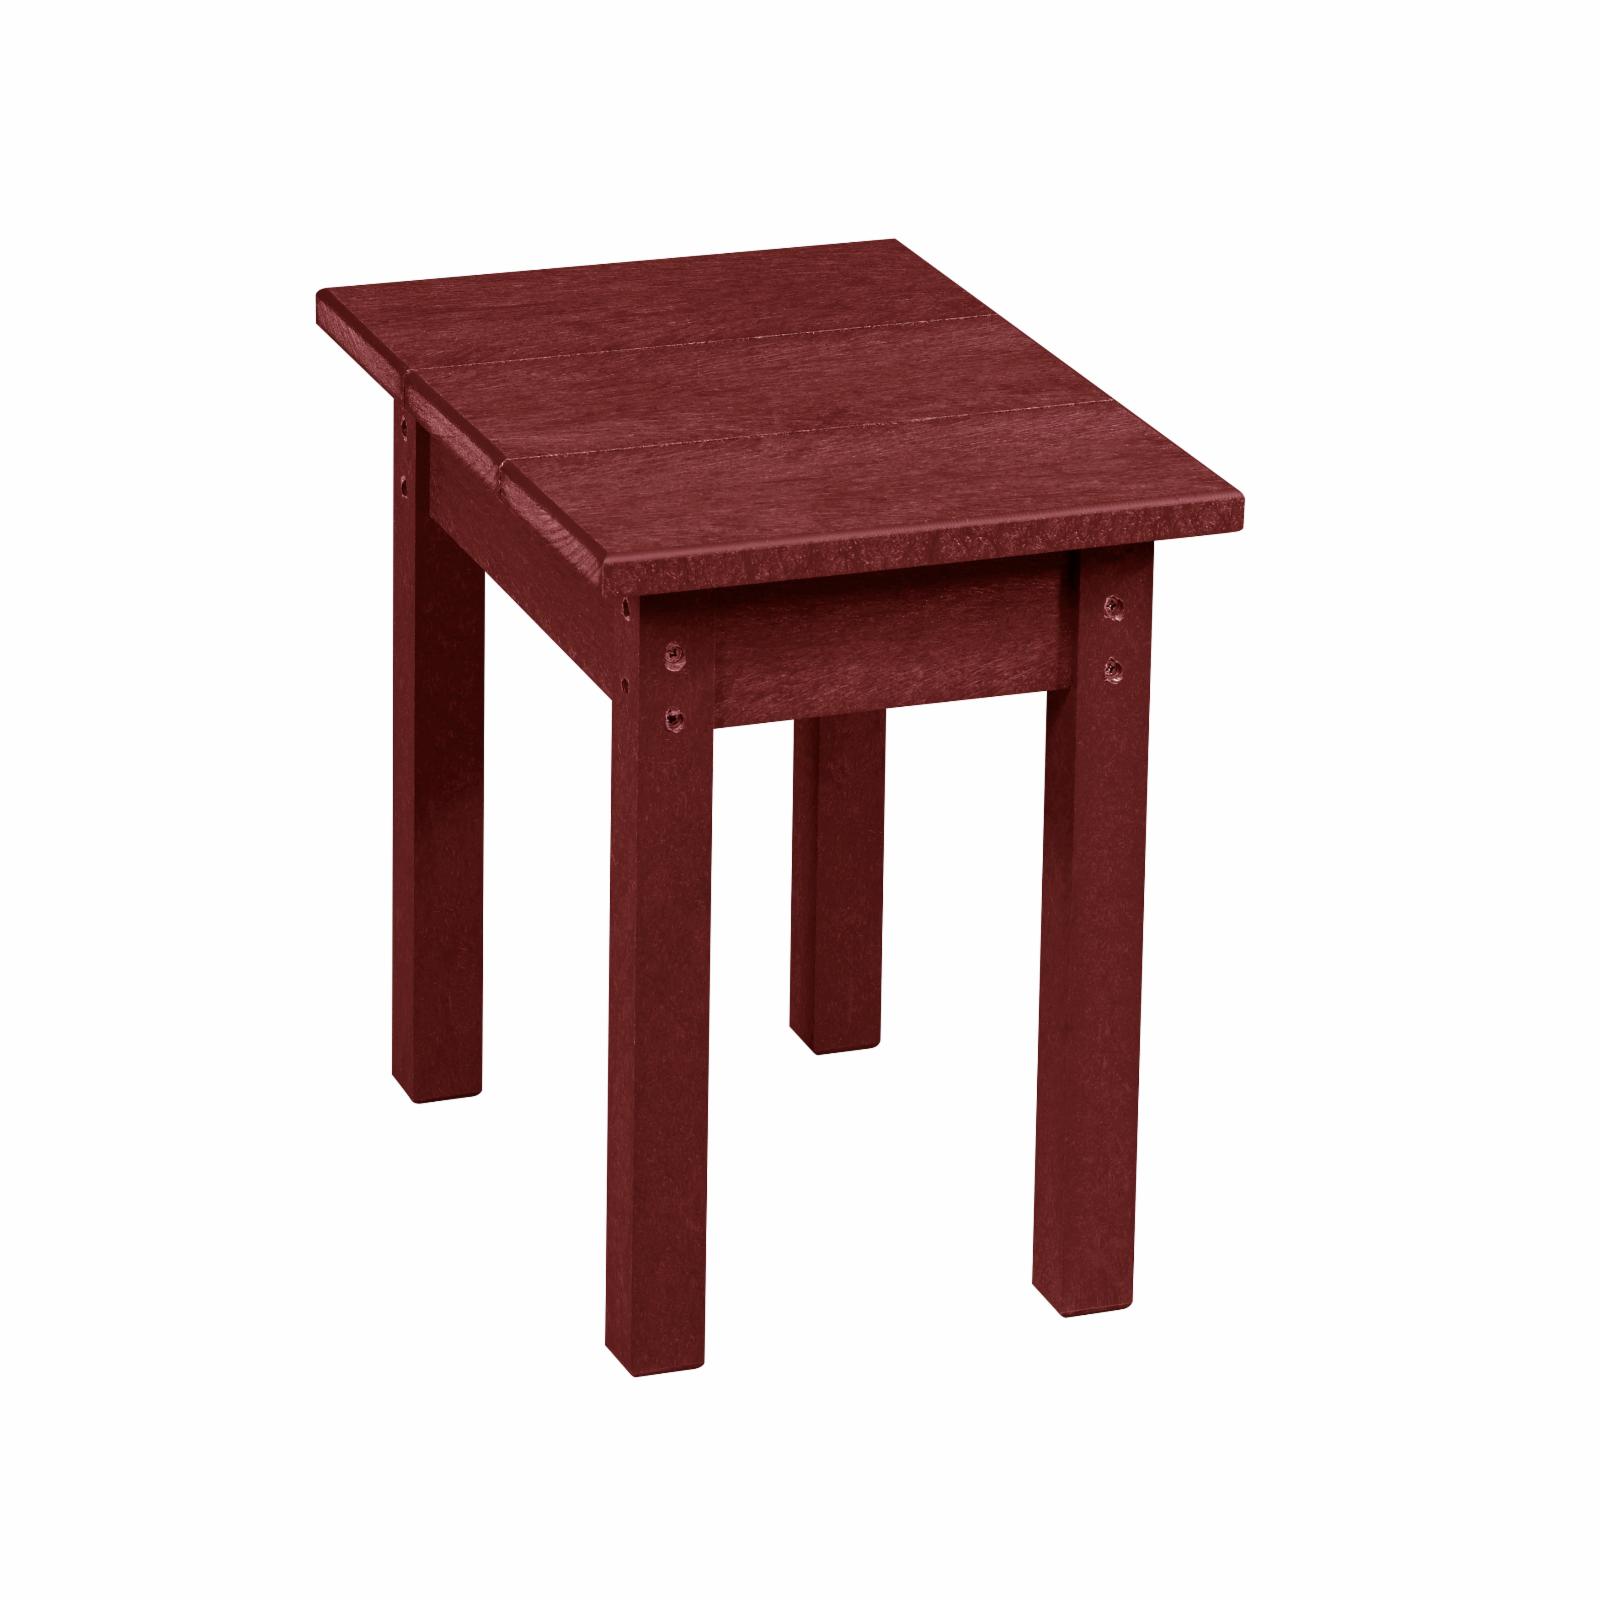 HN Outdoor Logan Recycled Plastic Small Outdoor Side Table - image 2 of 10